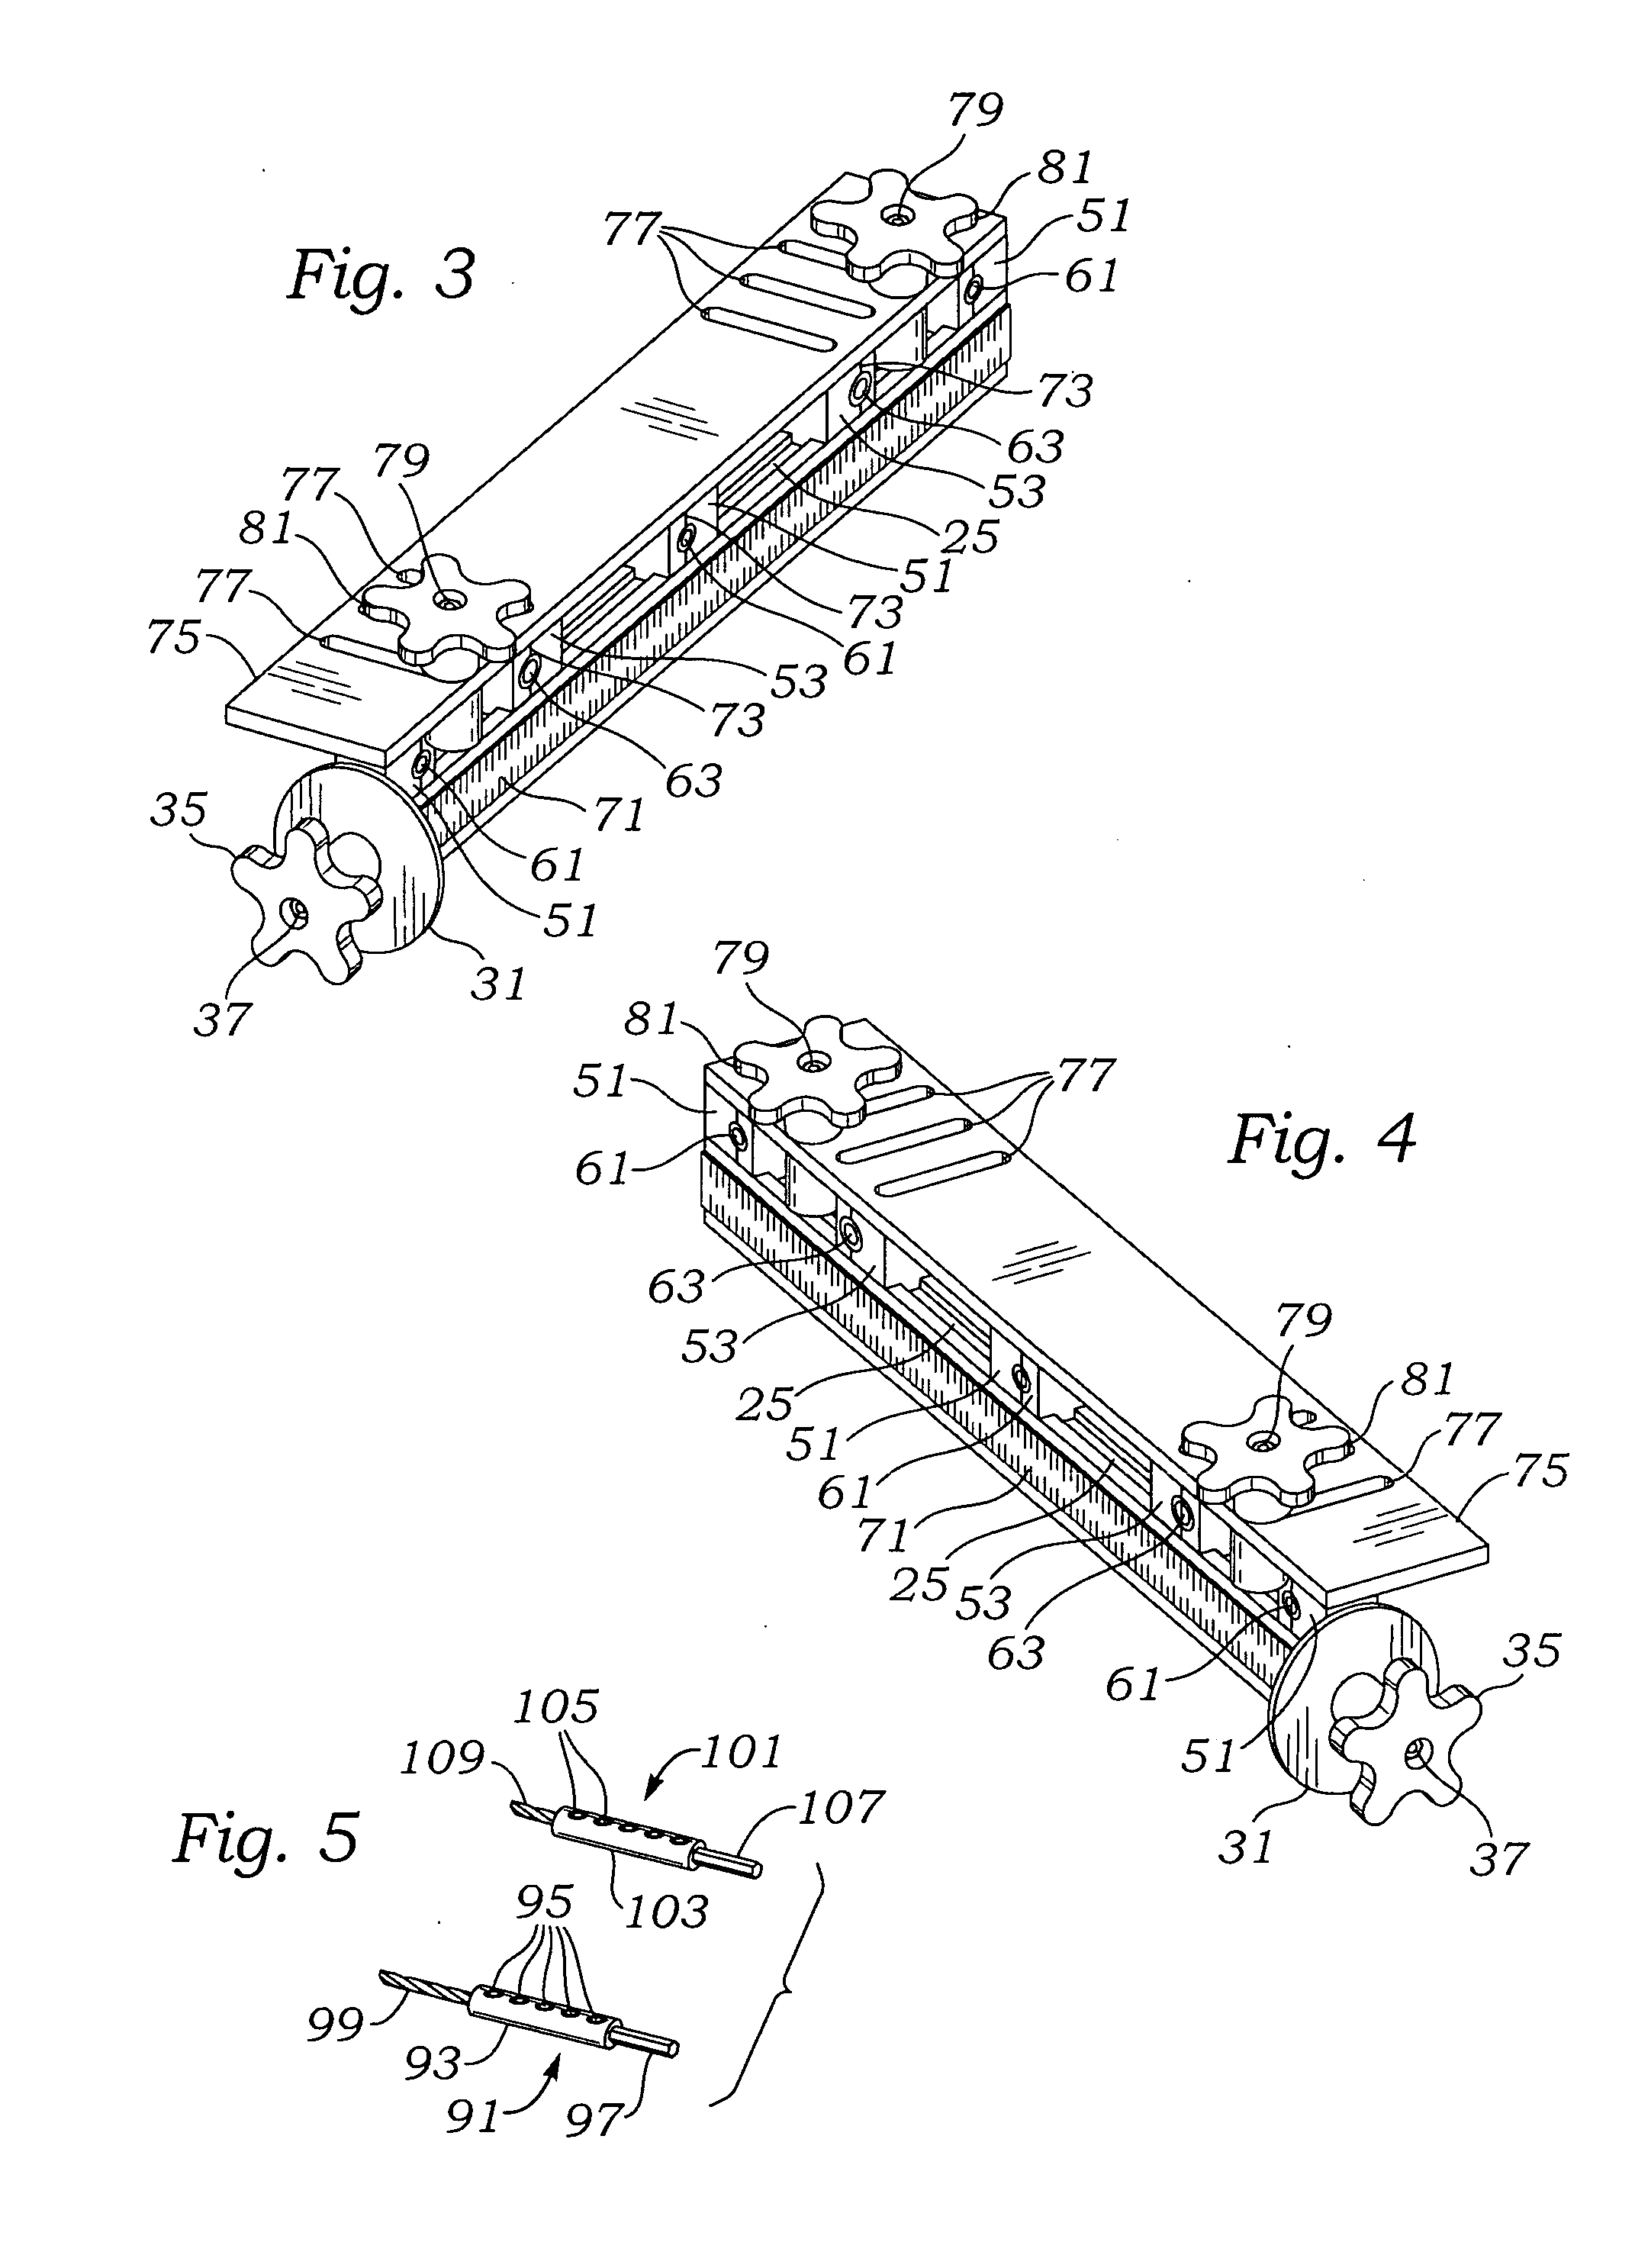 Cabinet assembly bore indexing tool and method